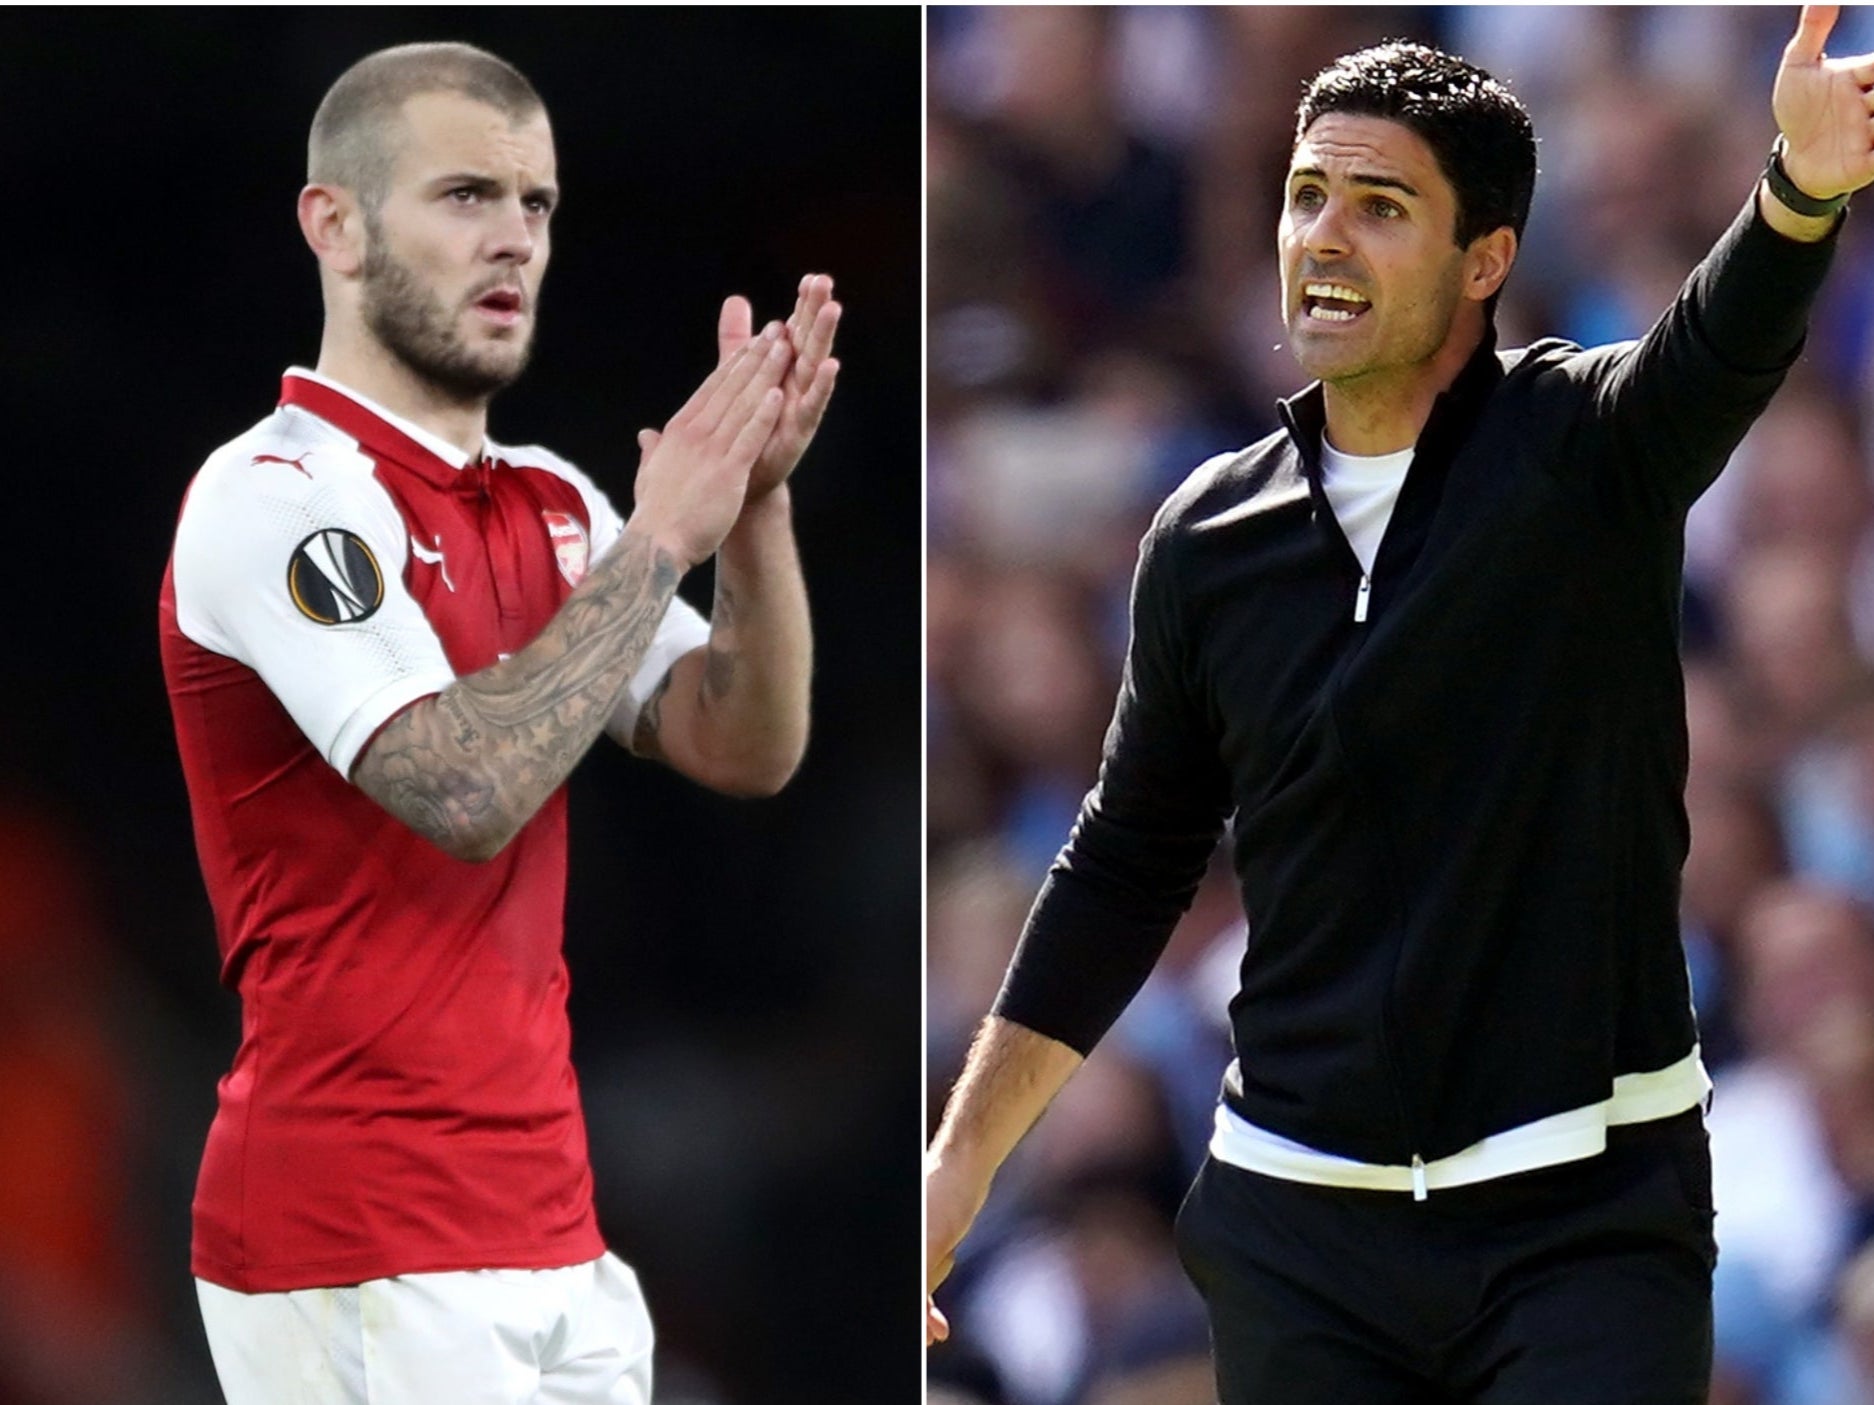 Jack Wilshere could return to train with Arsenal according to boss Mikel Arteta